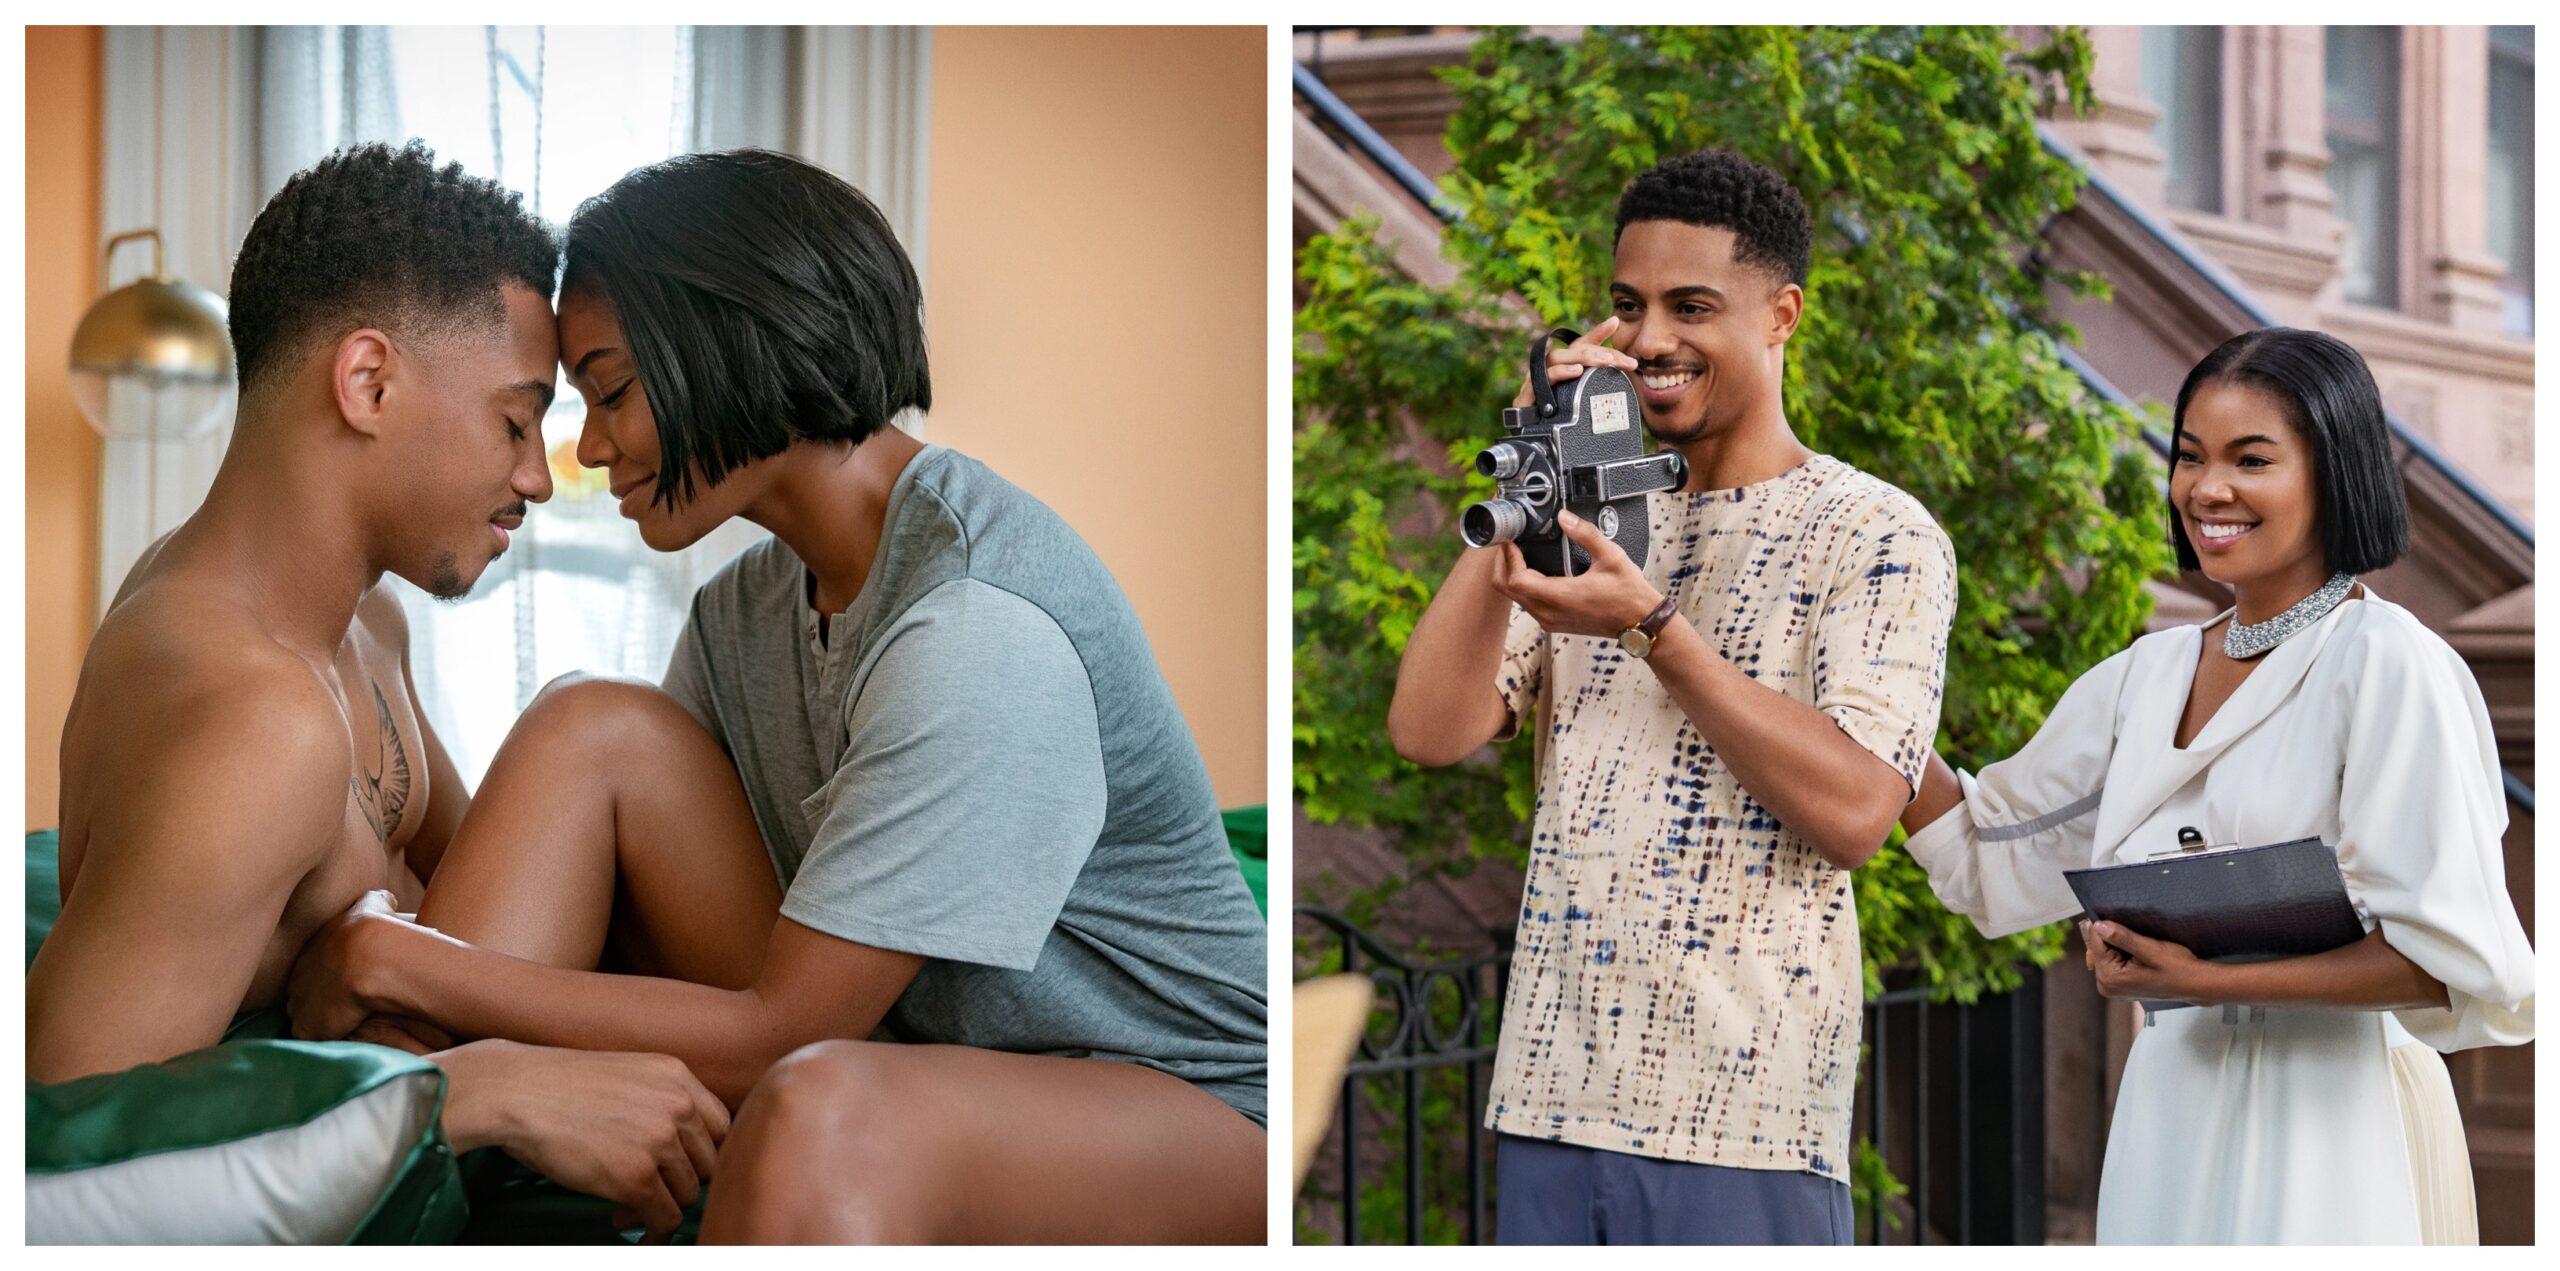 Movie Trailer: ‘The Perfect Find’ [Starring Gabrielle Union & Keith Powers]